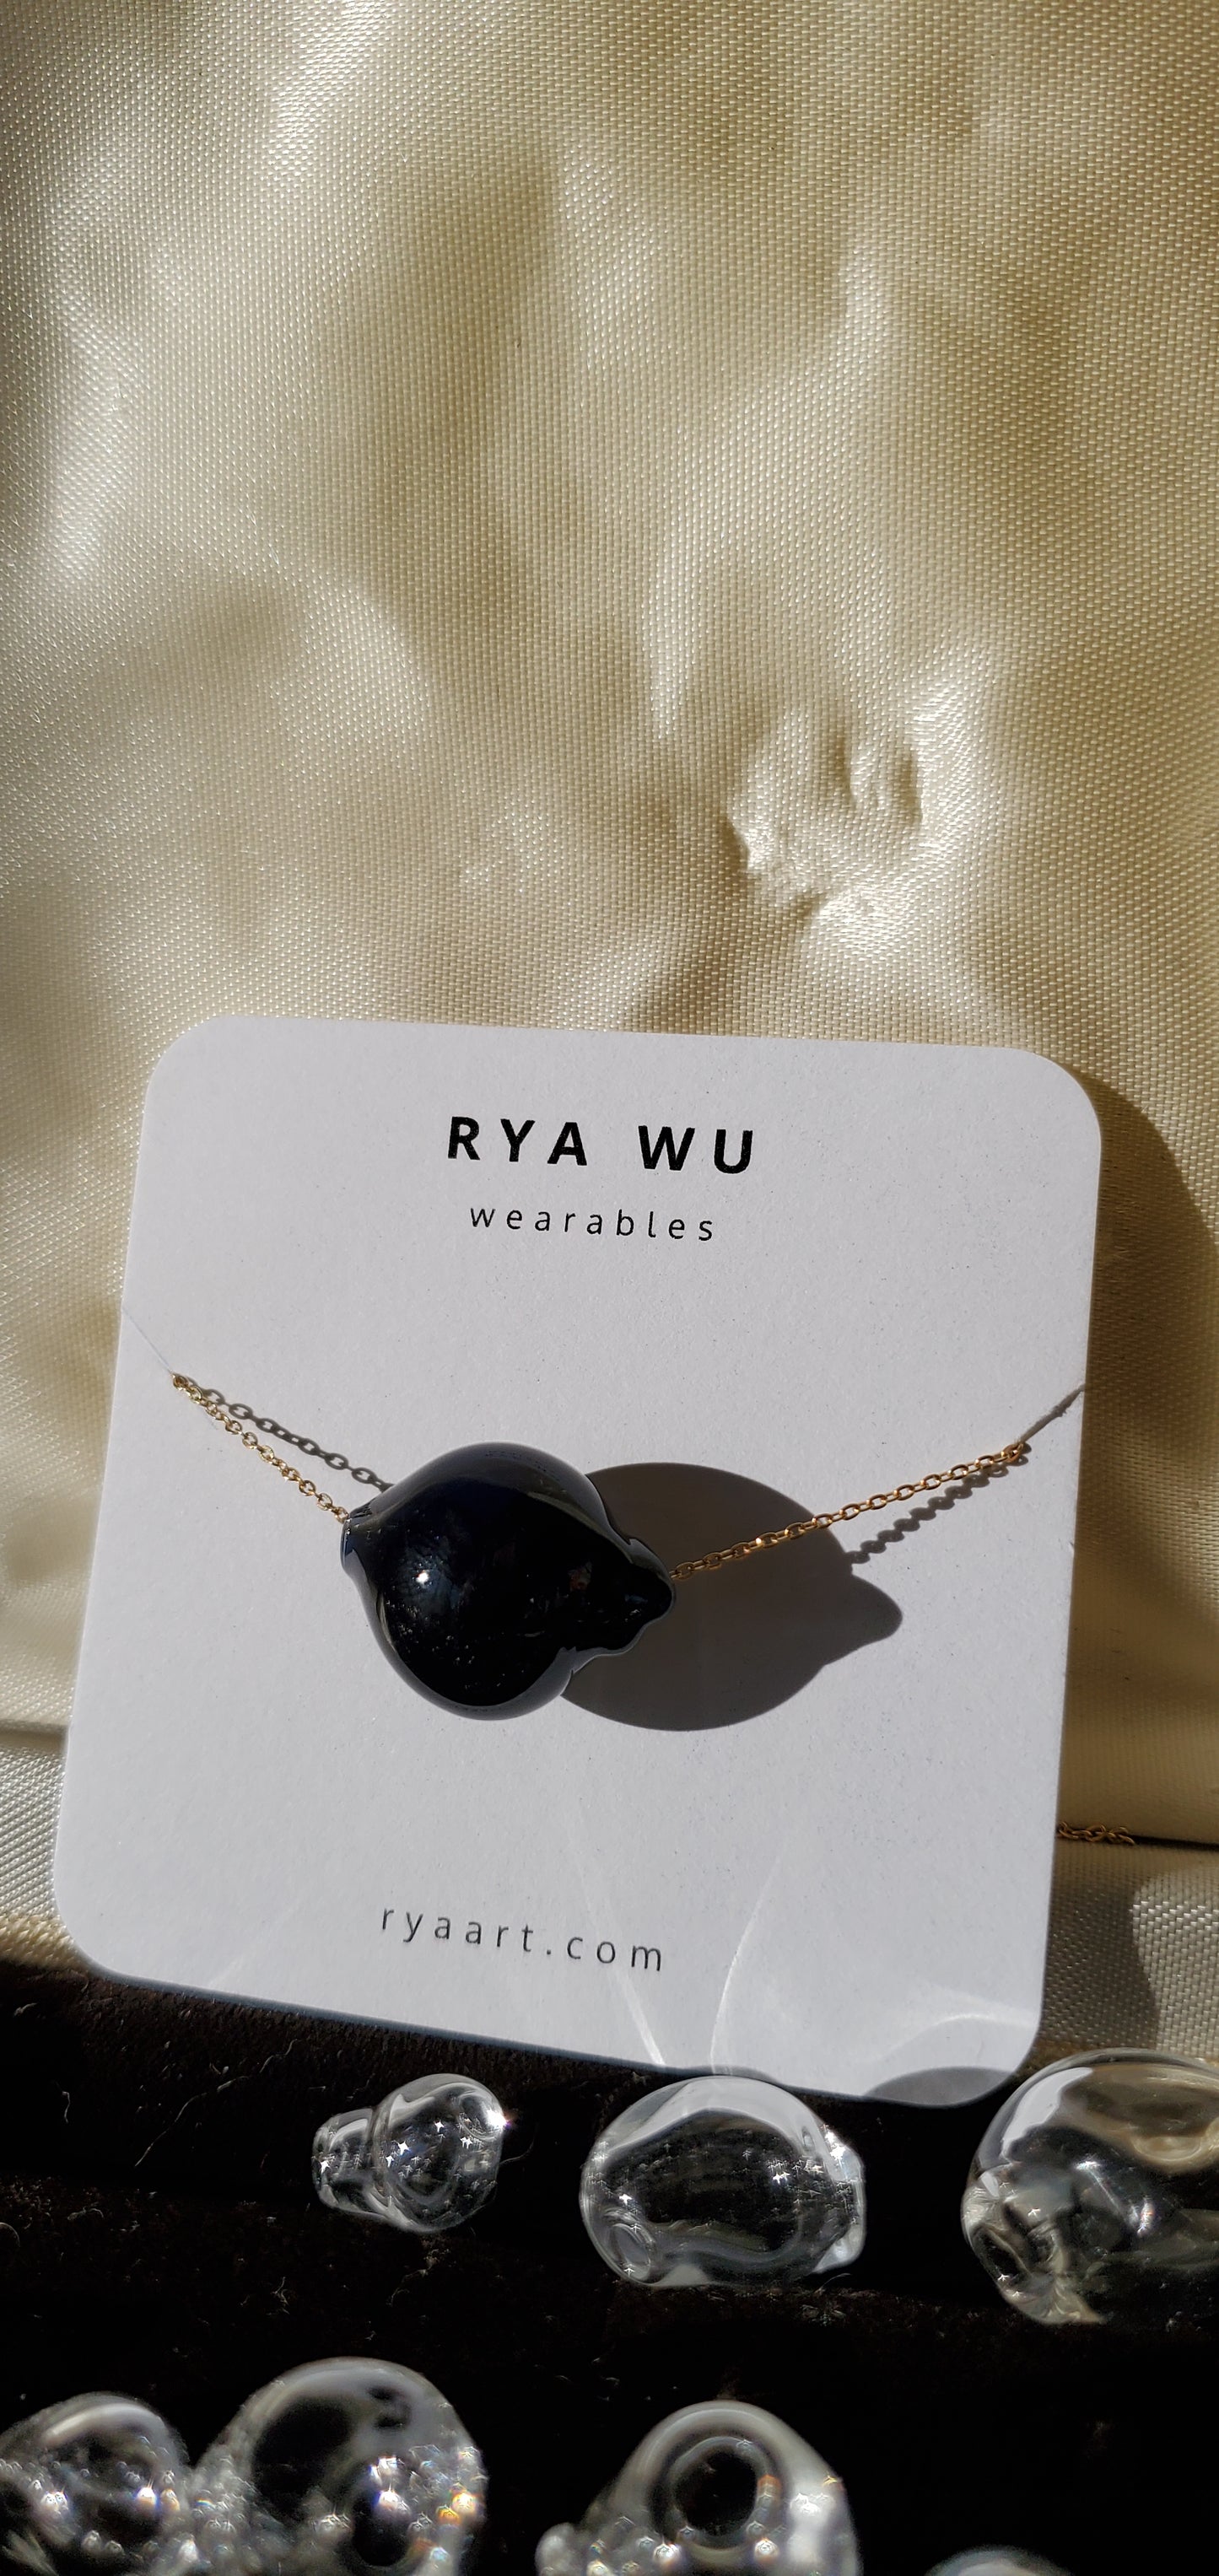 The Black Bauble Necklace